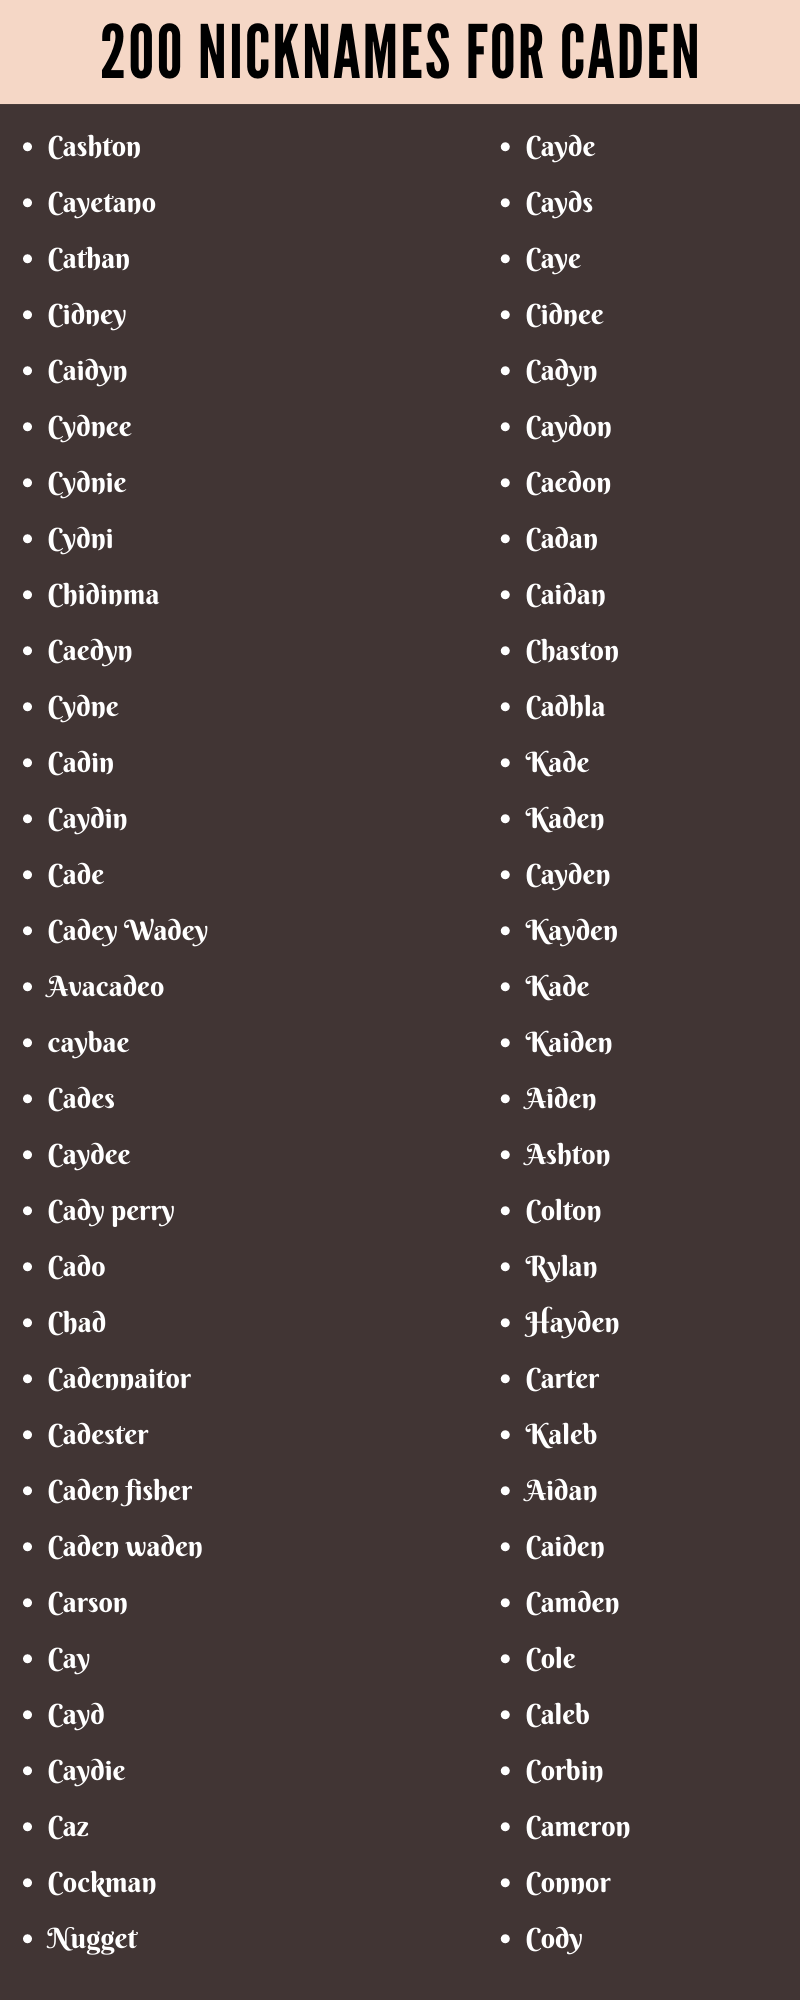 Nicknames for Caden: 200 Adorable and Funny Names